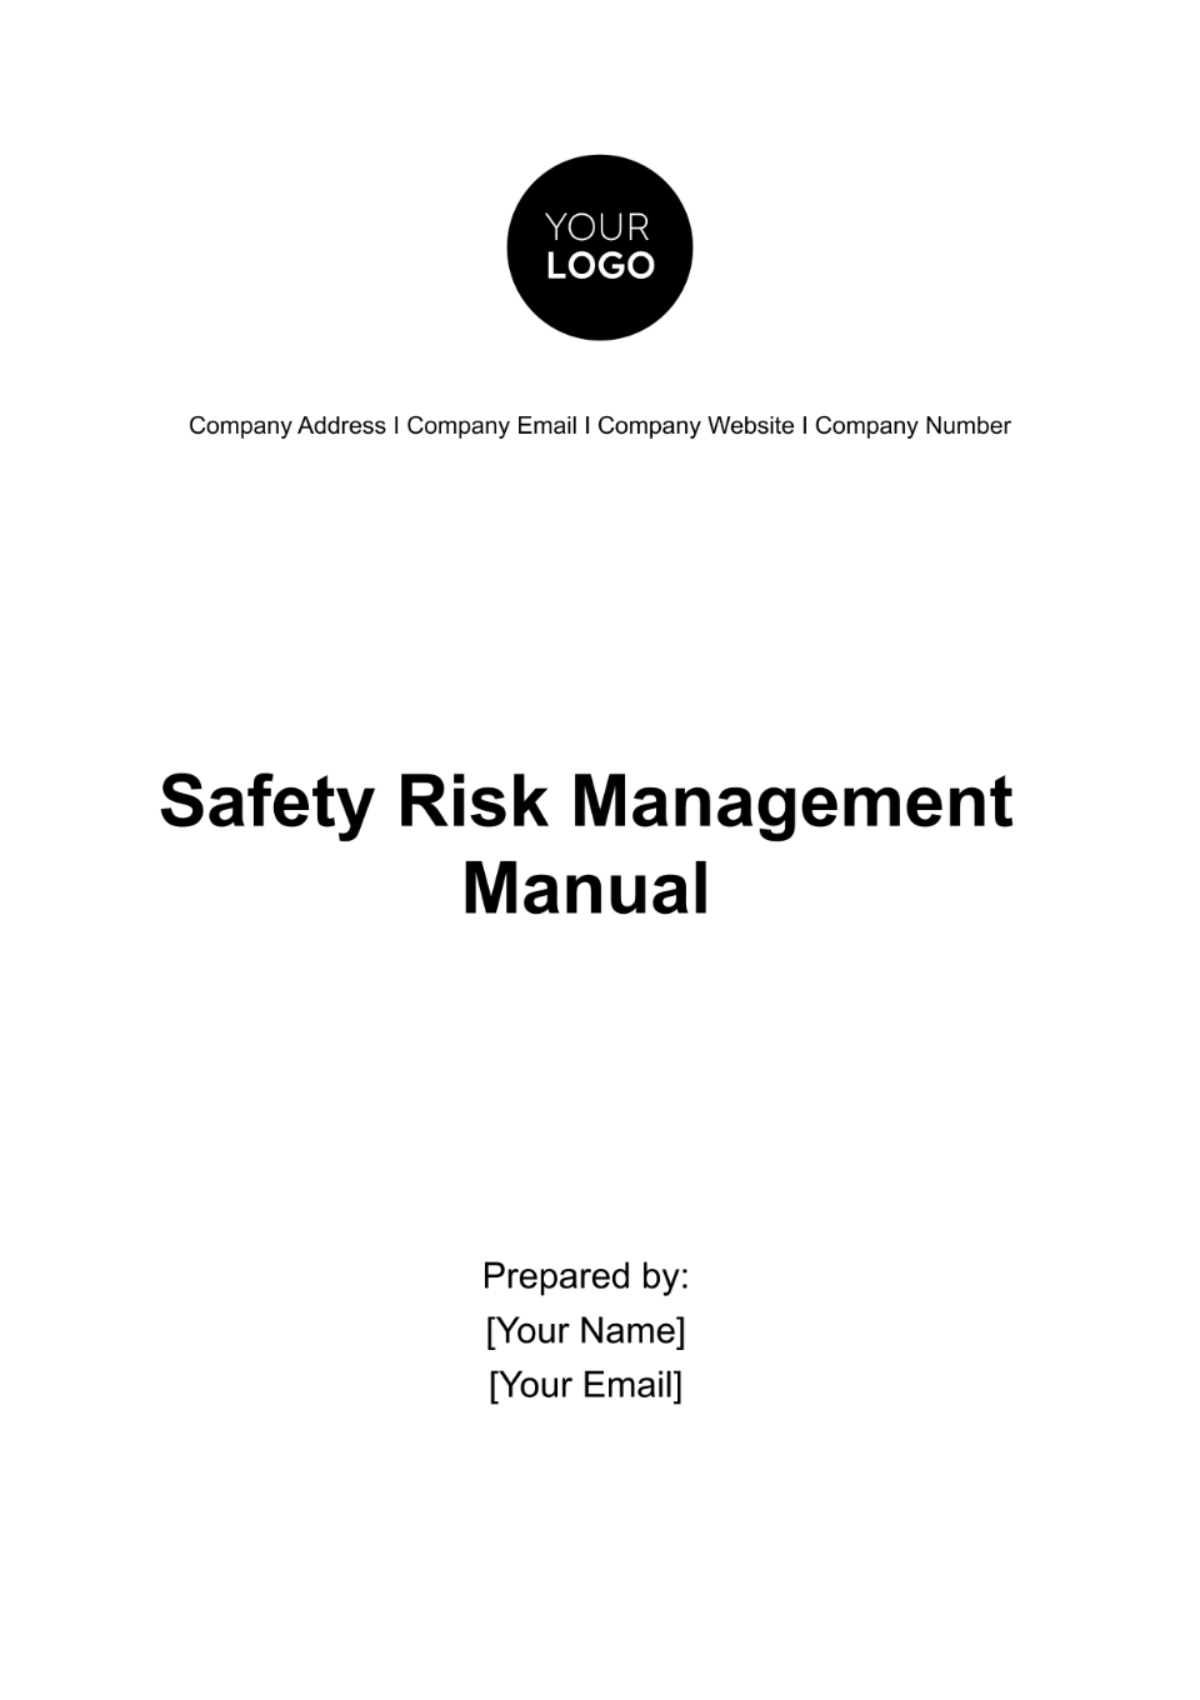 Safety Risk Management Manual Template